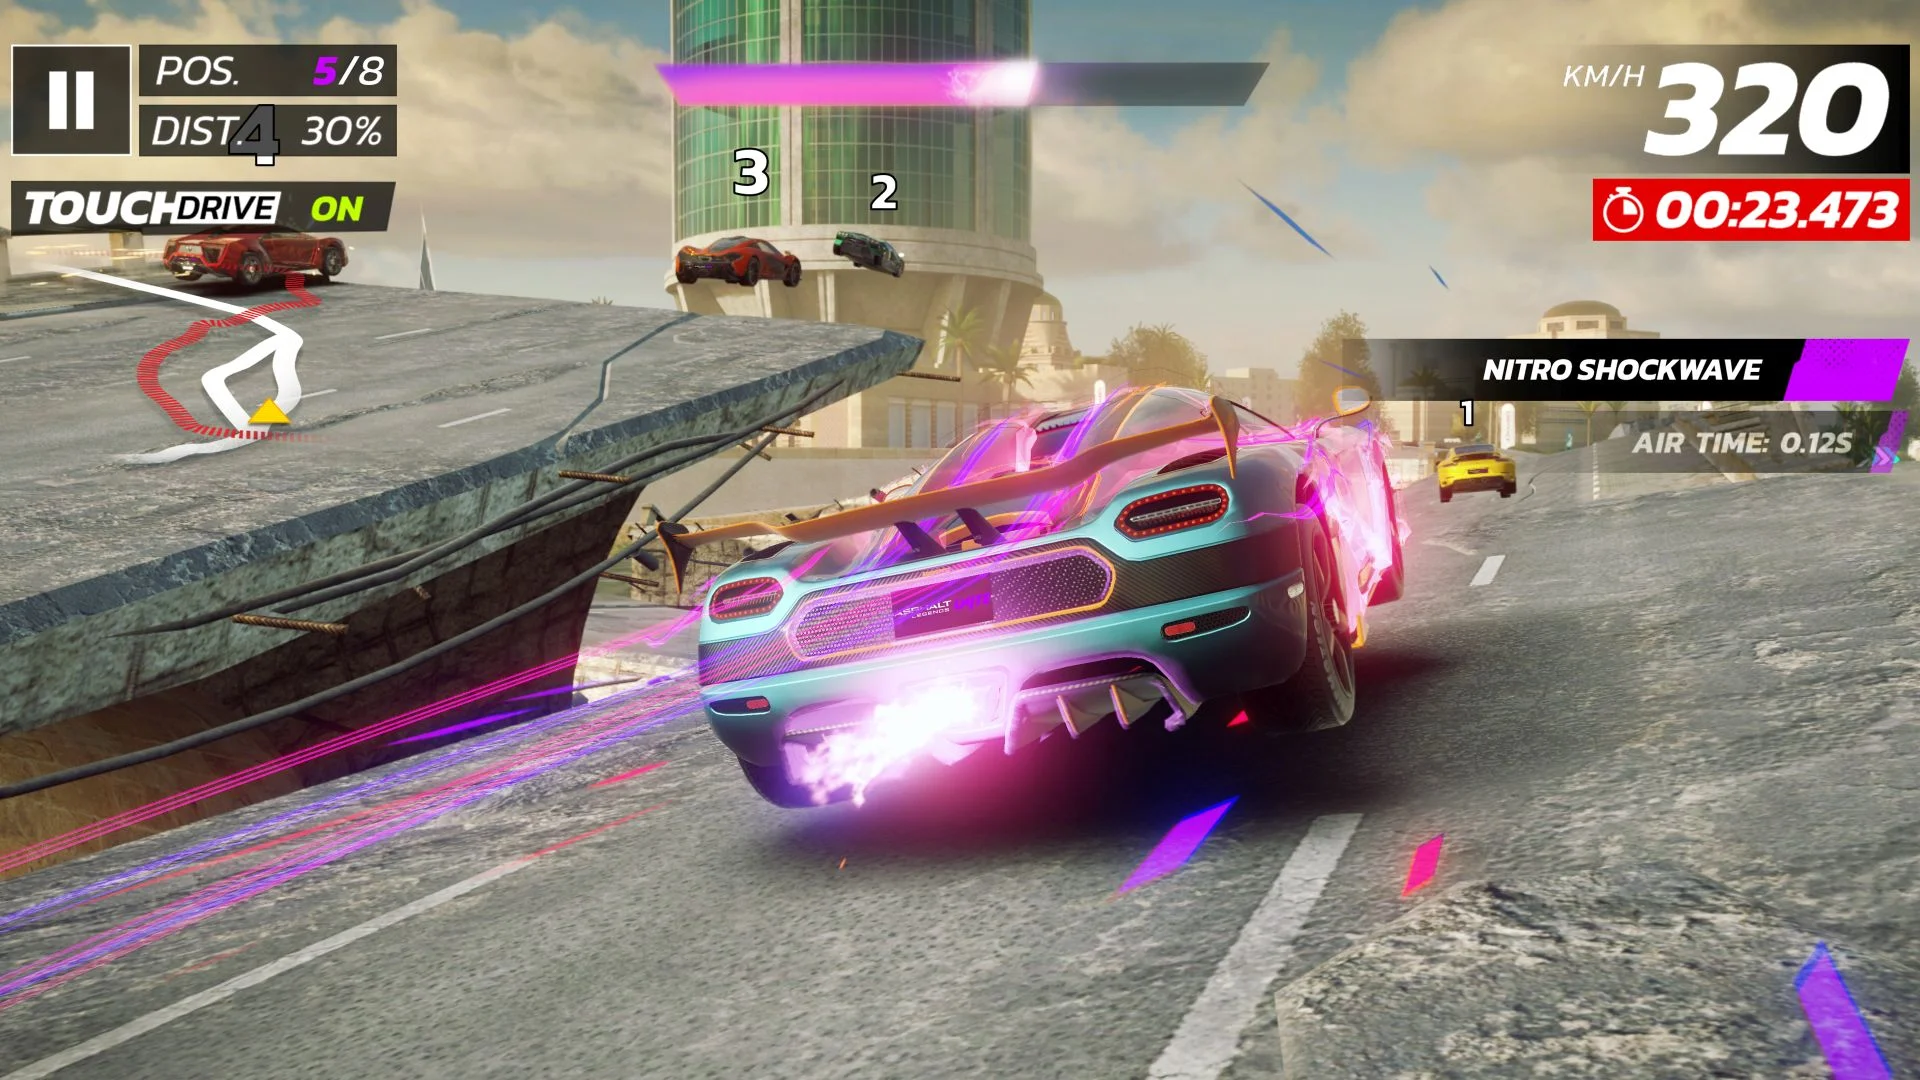 A new part of the racing arcade Asphalt from Gameloft has been announced